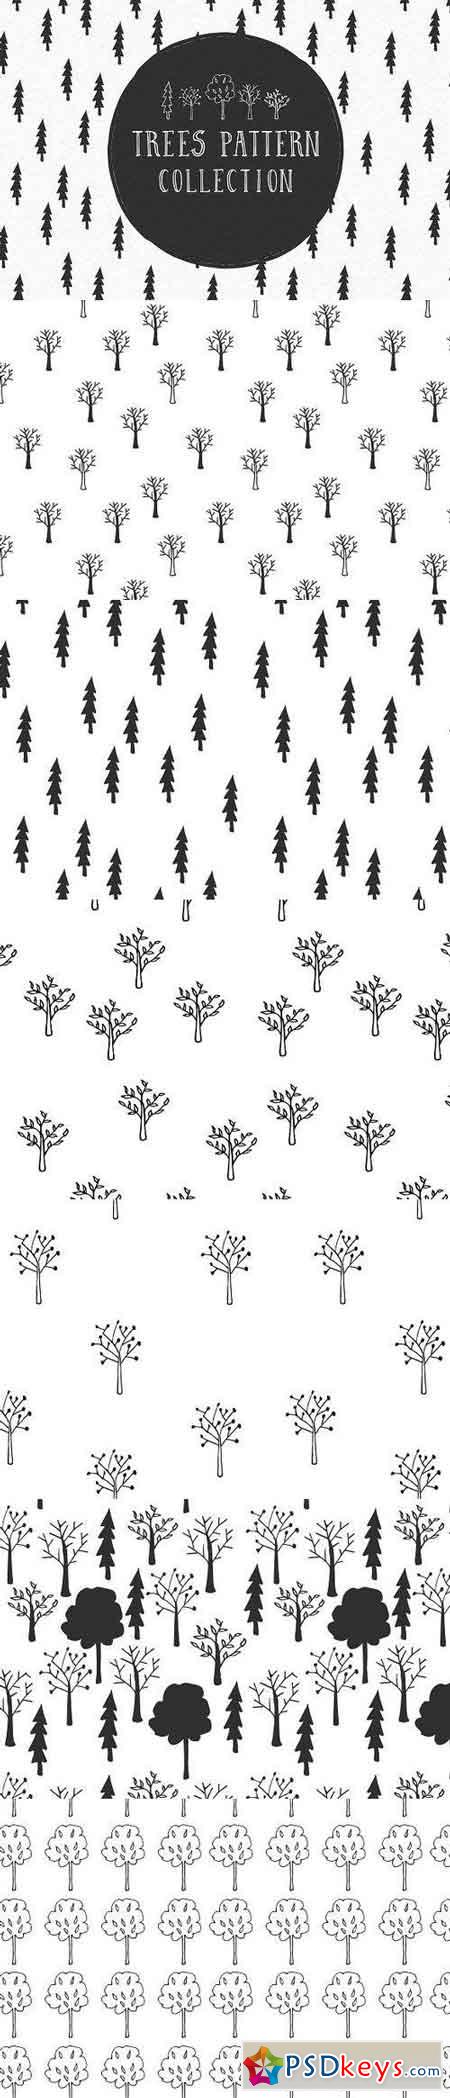 Trees pattern collection 820141